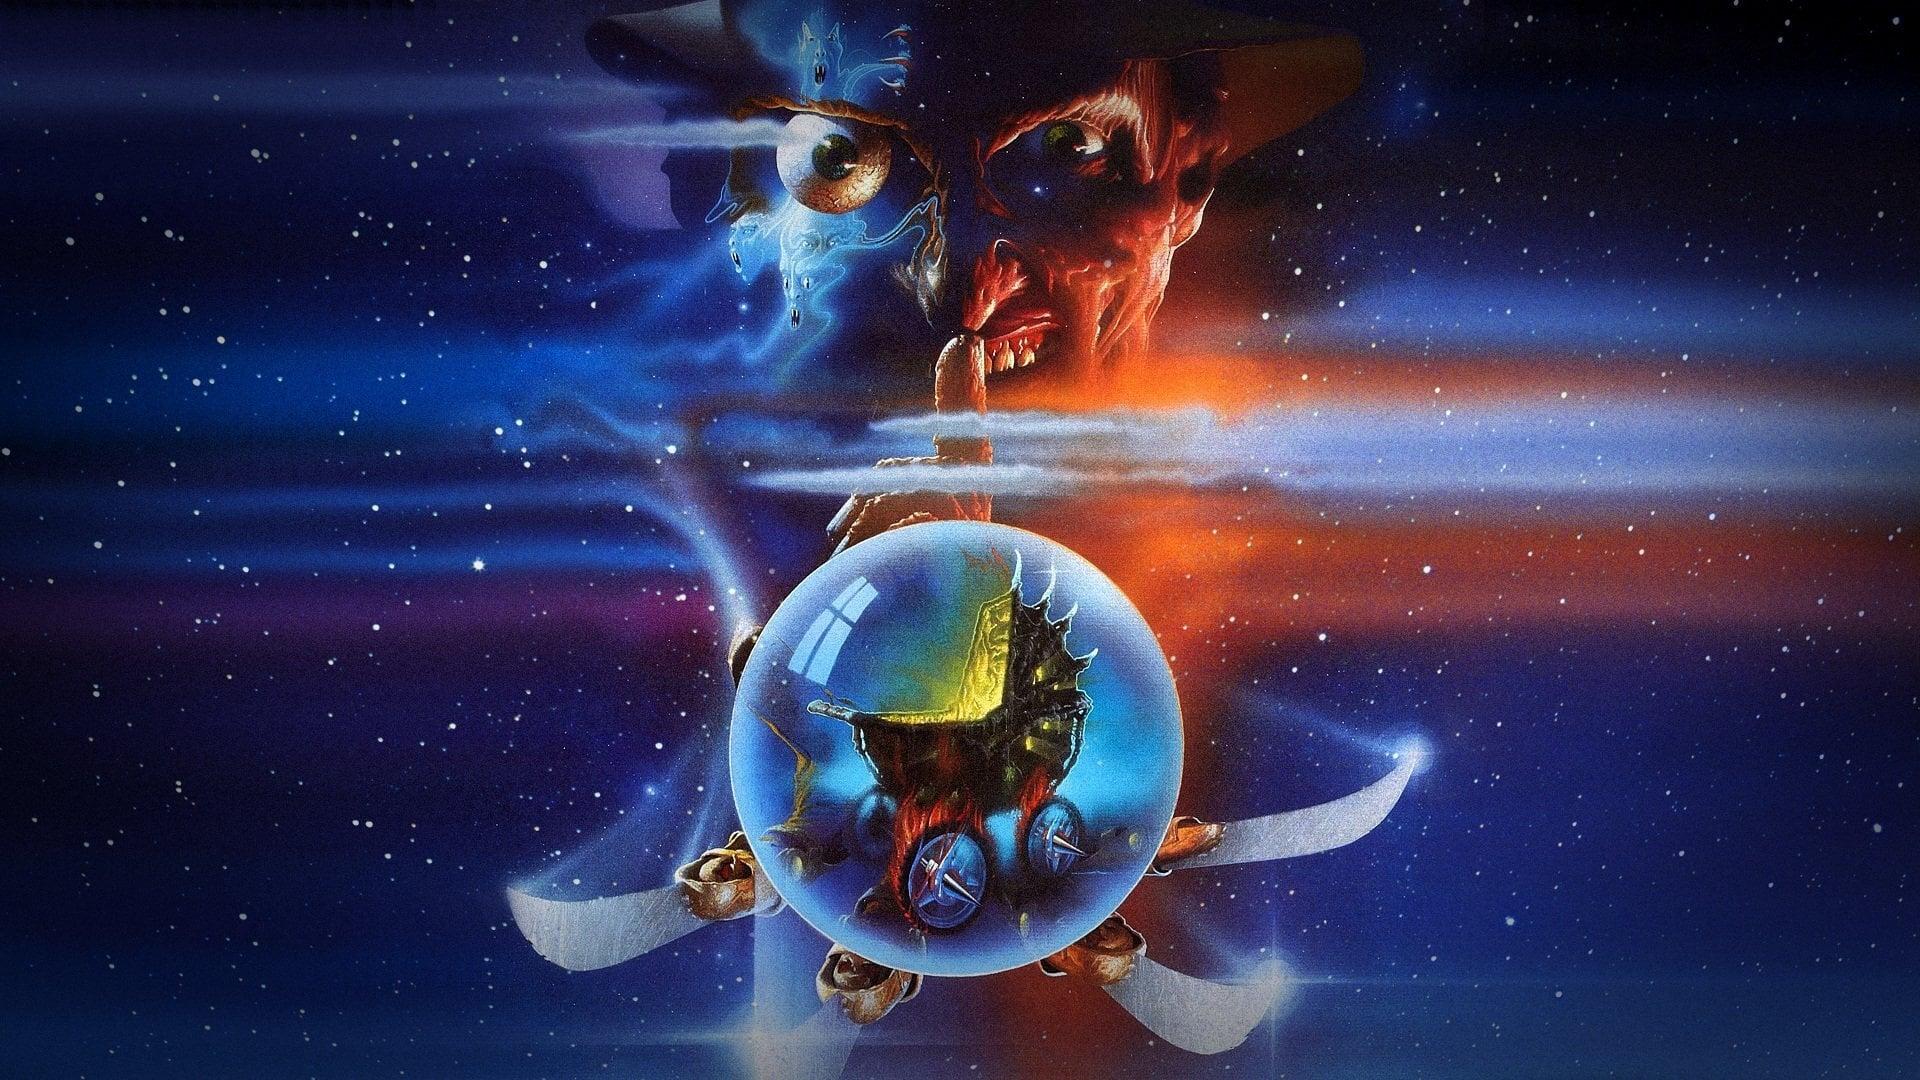 A Nightmare on Elm Street: The Dream Child backdrop